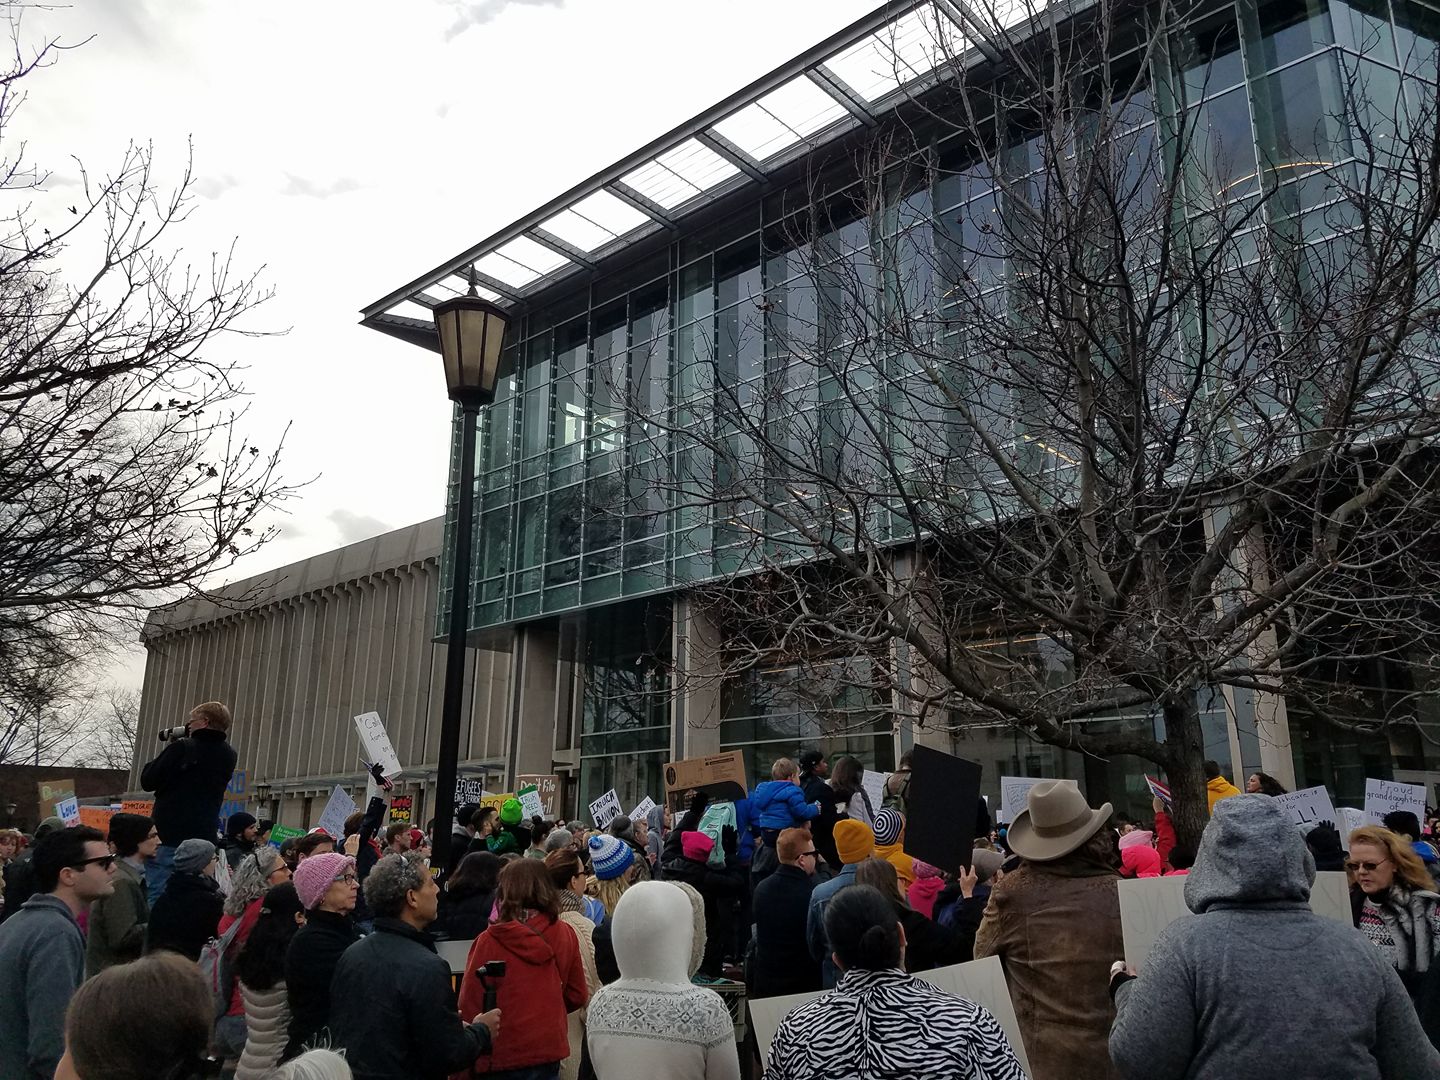 Protesters gather at the Monroe Park campus of Virginia Commonwealth University. Photo courtesy of anonymous protester and contributor